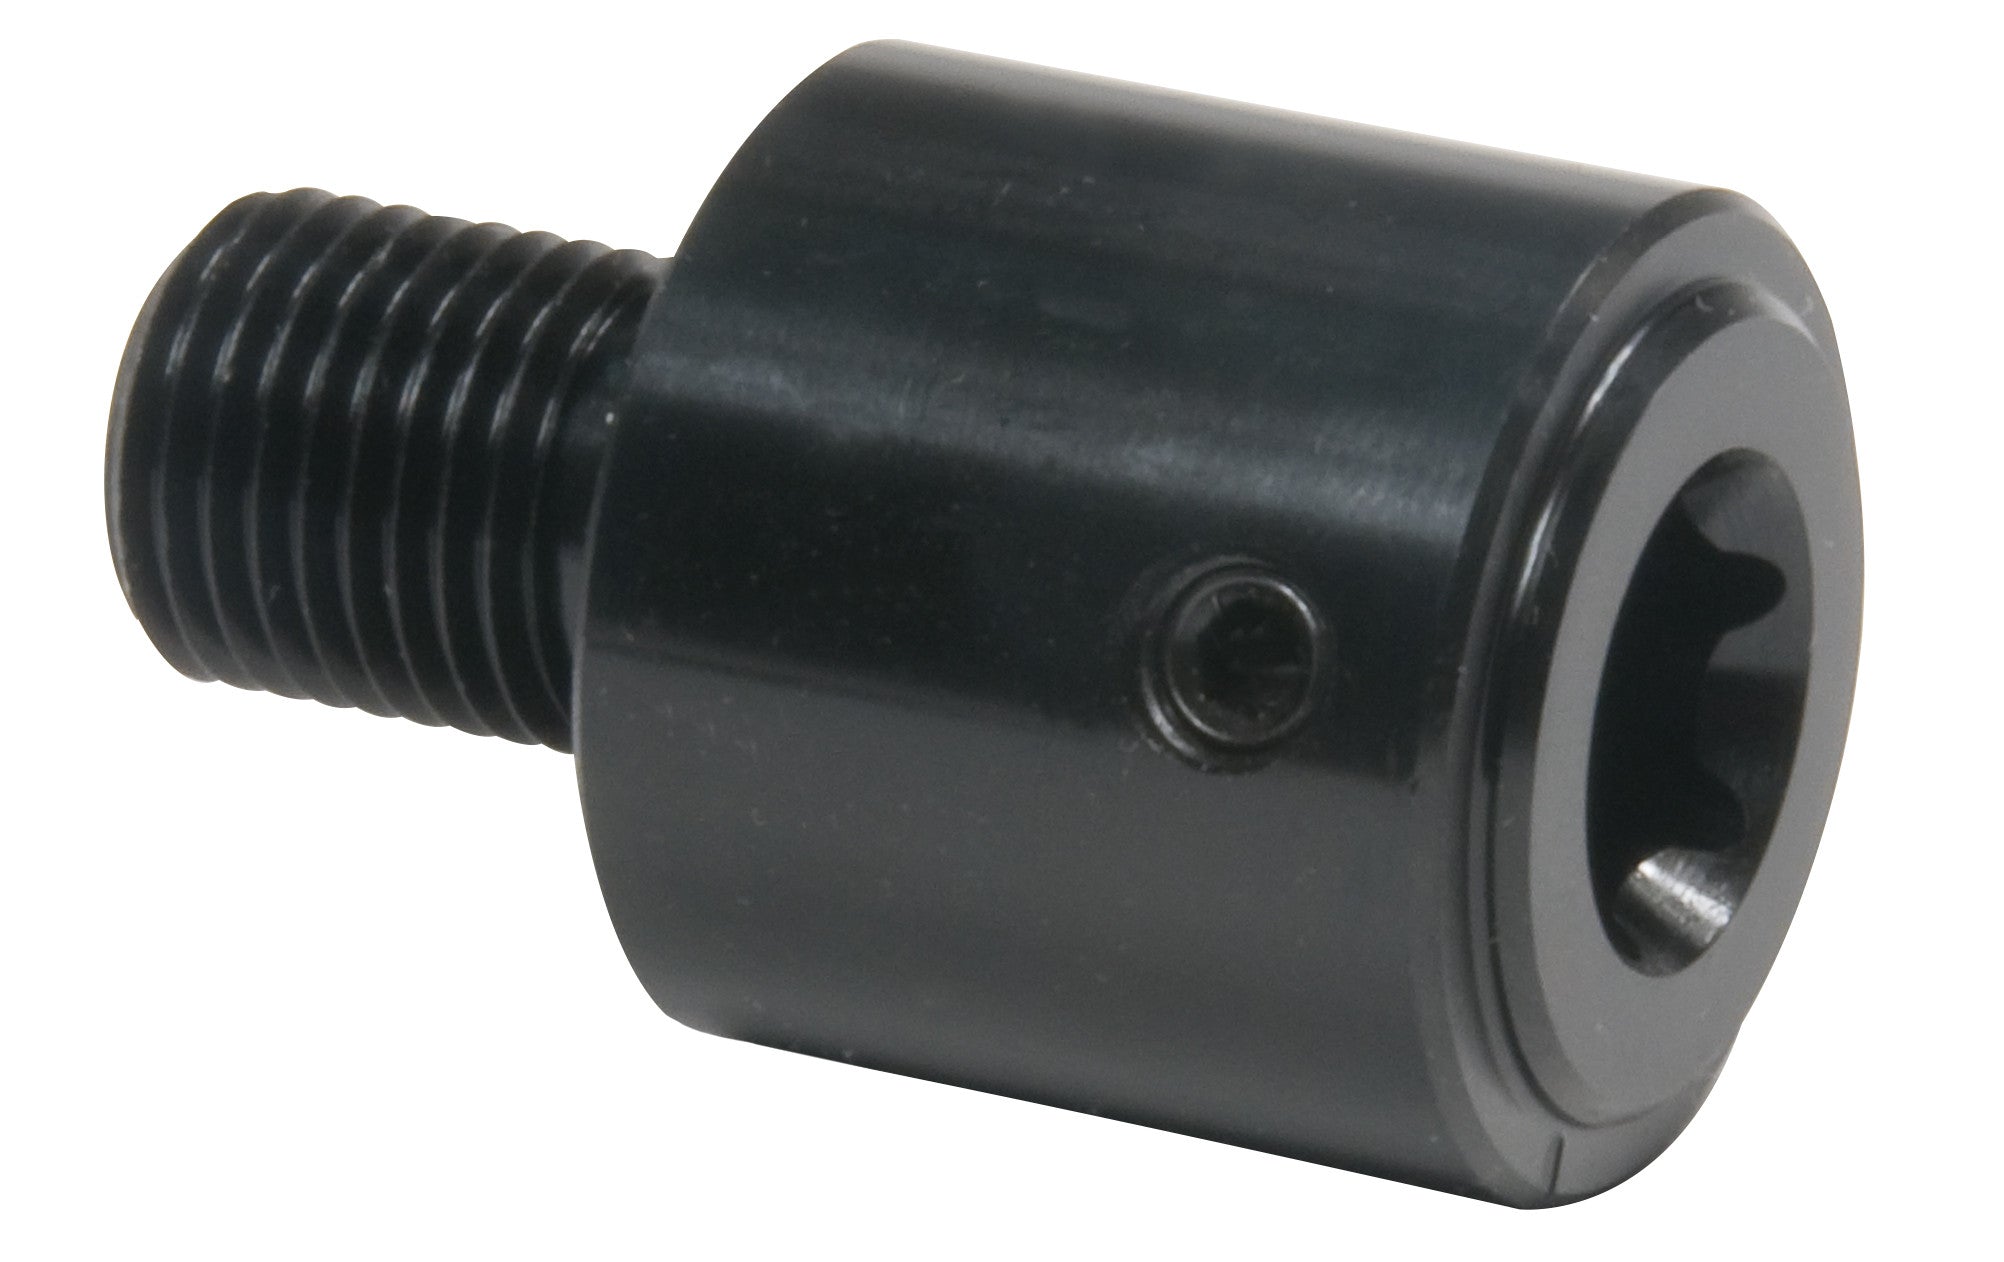 Chuck adapter for hex drive HMD904 drills